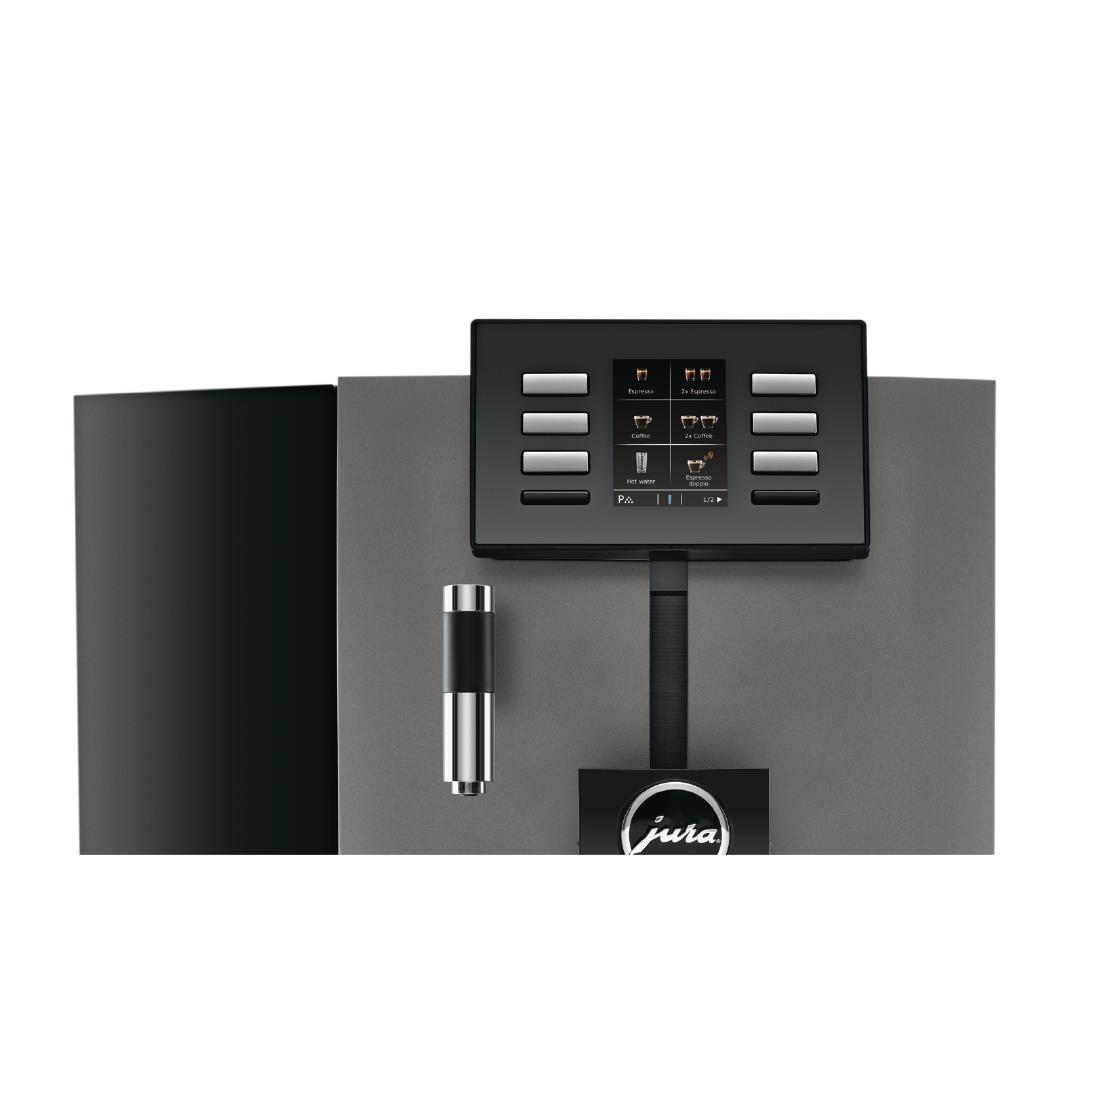 Jura JX6 Manual Fill Bean to Cup Coffee Machine 15191 with Filter/Installation/Training - DT420-M  - 3